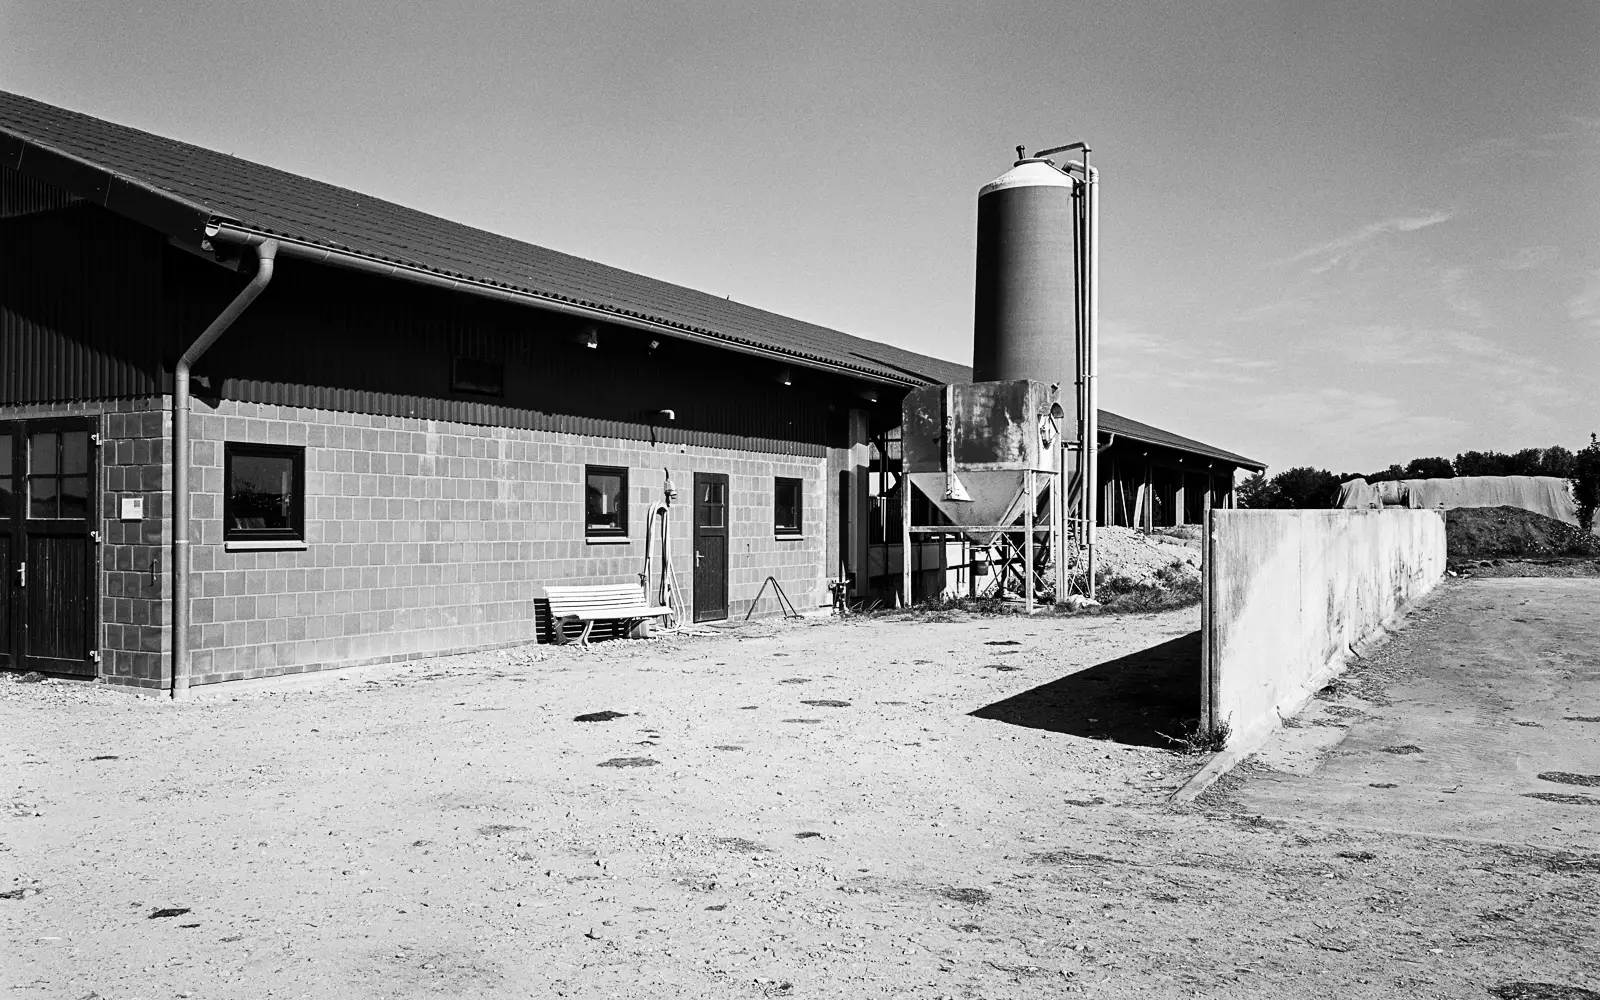 A modern cow barn with a silo tower on its side.